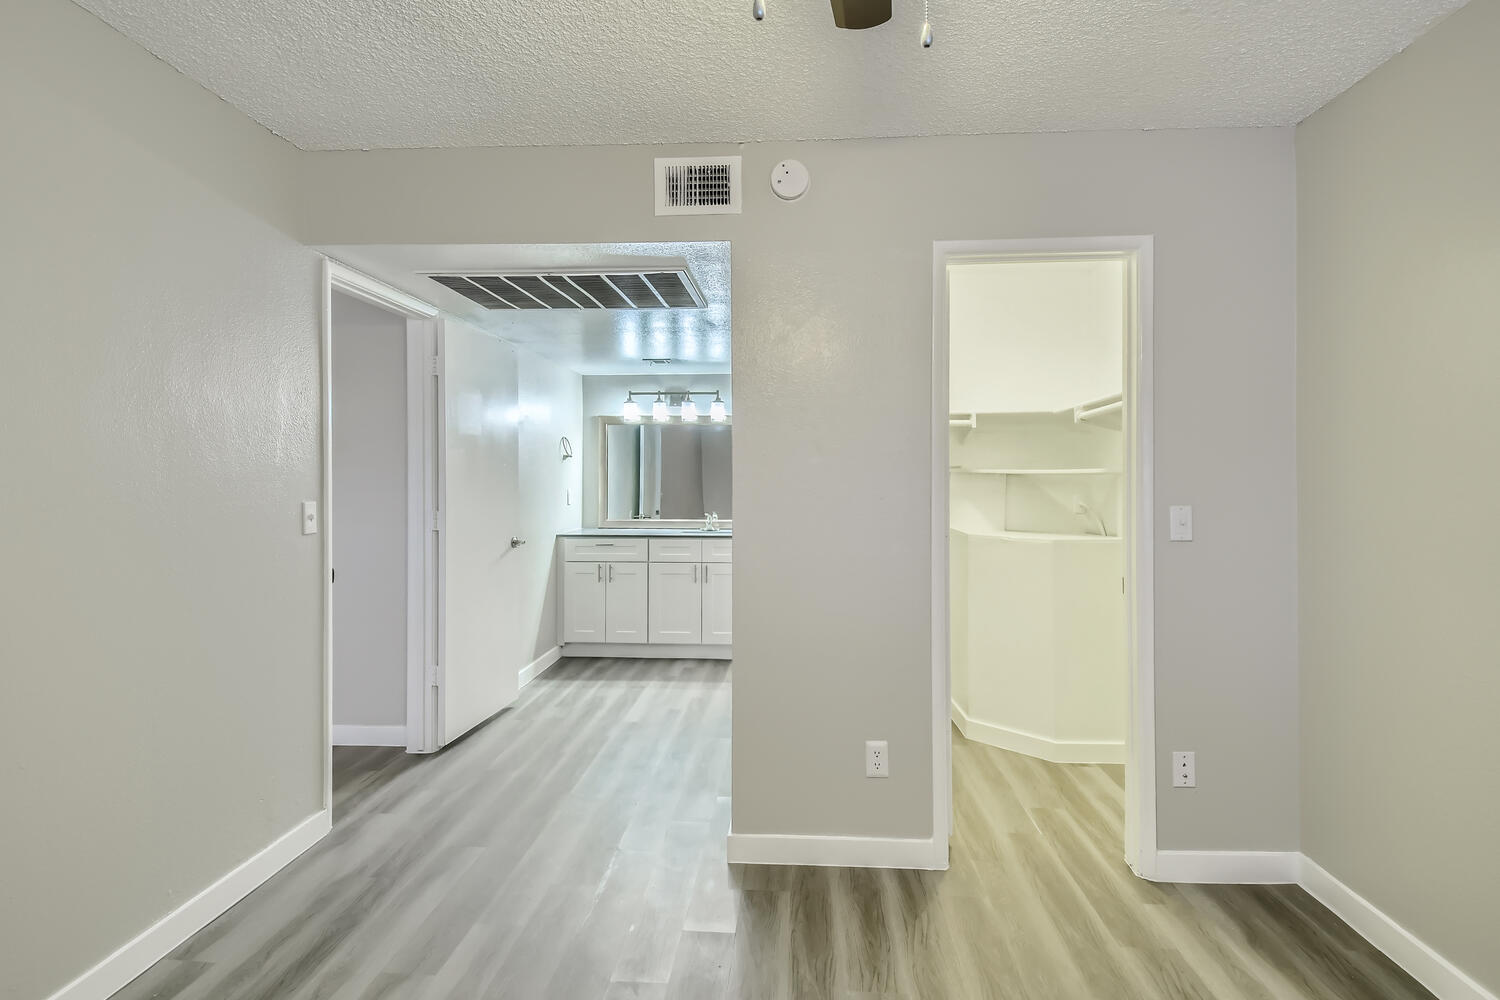 A large bedroom with wood-style flooring an en-suite bathroom and a walk-in closet at Rise North Ridge.